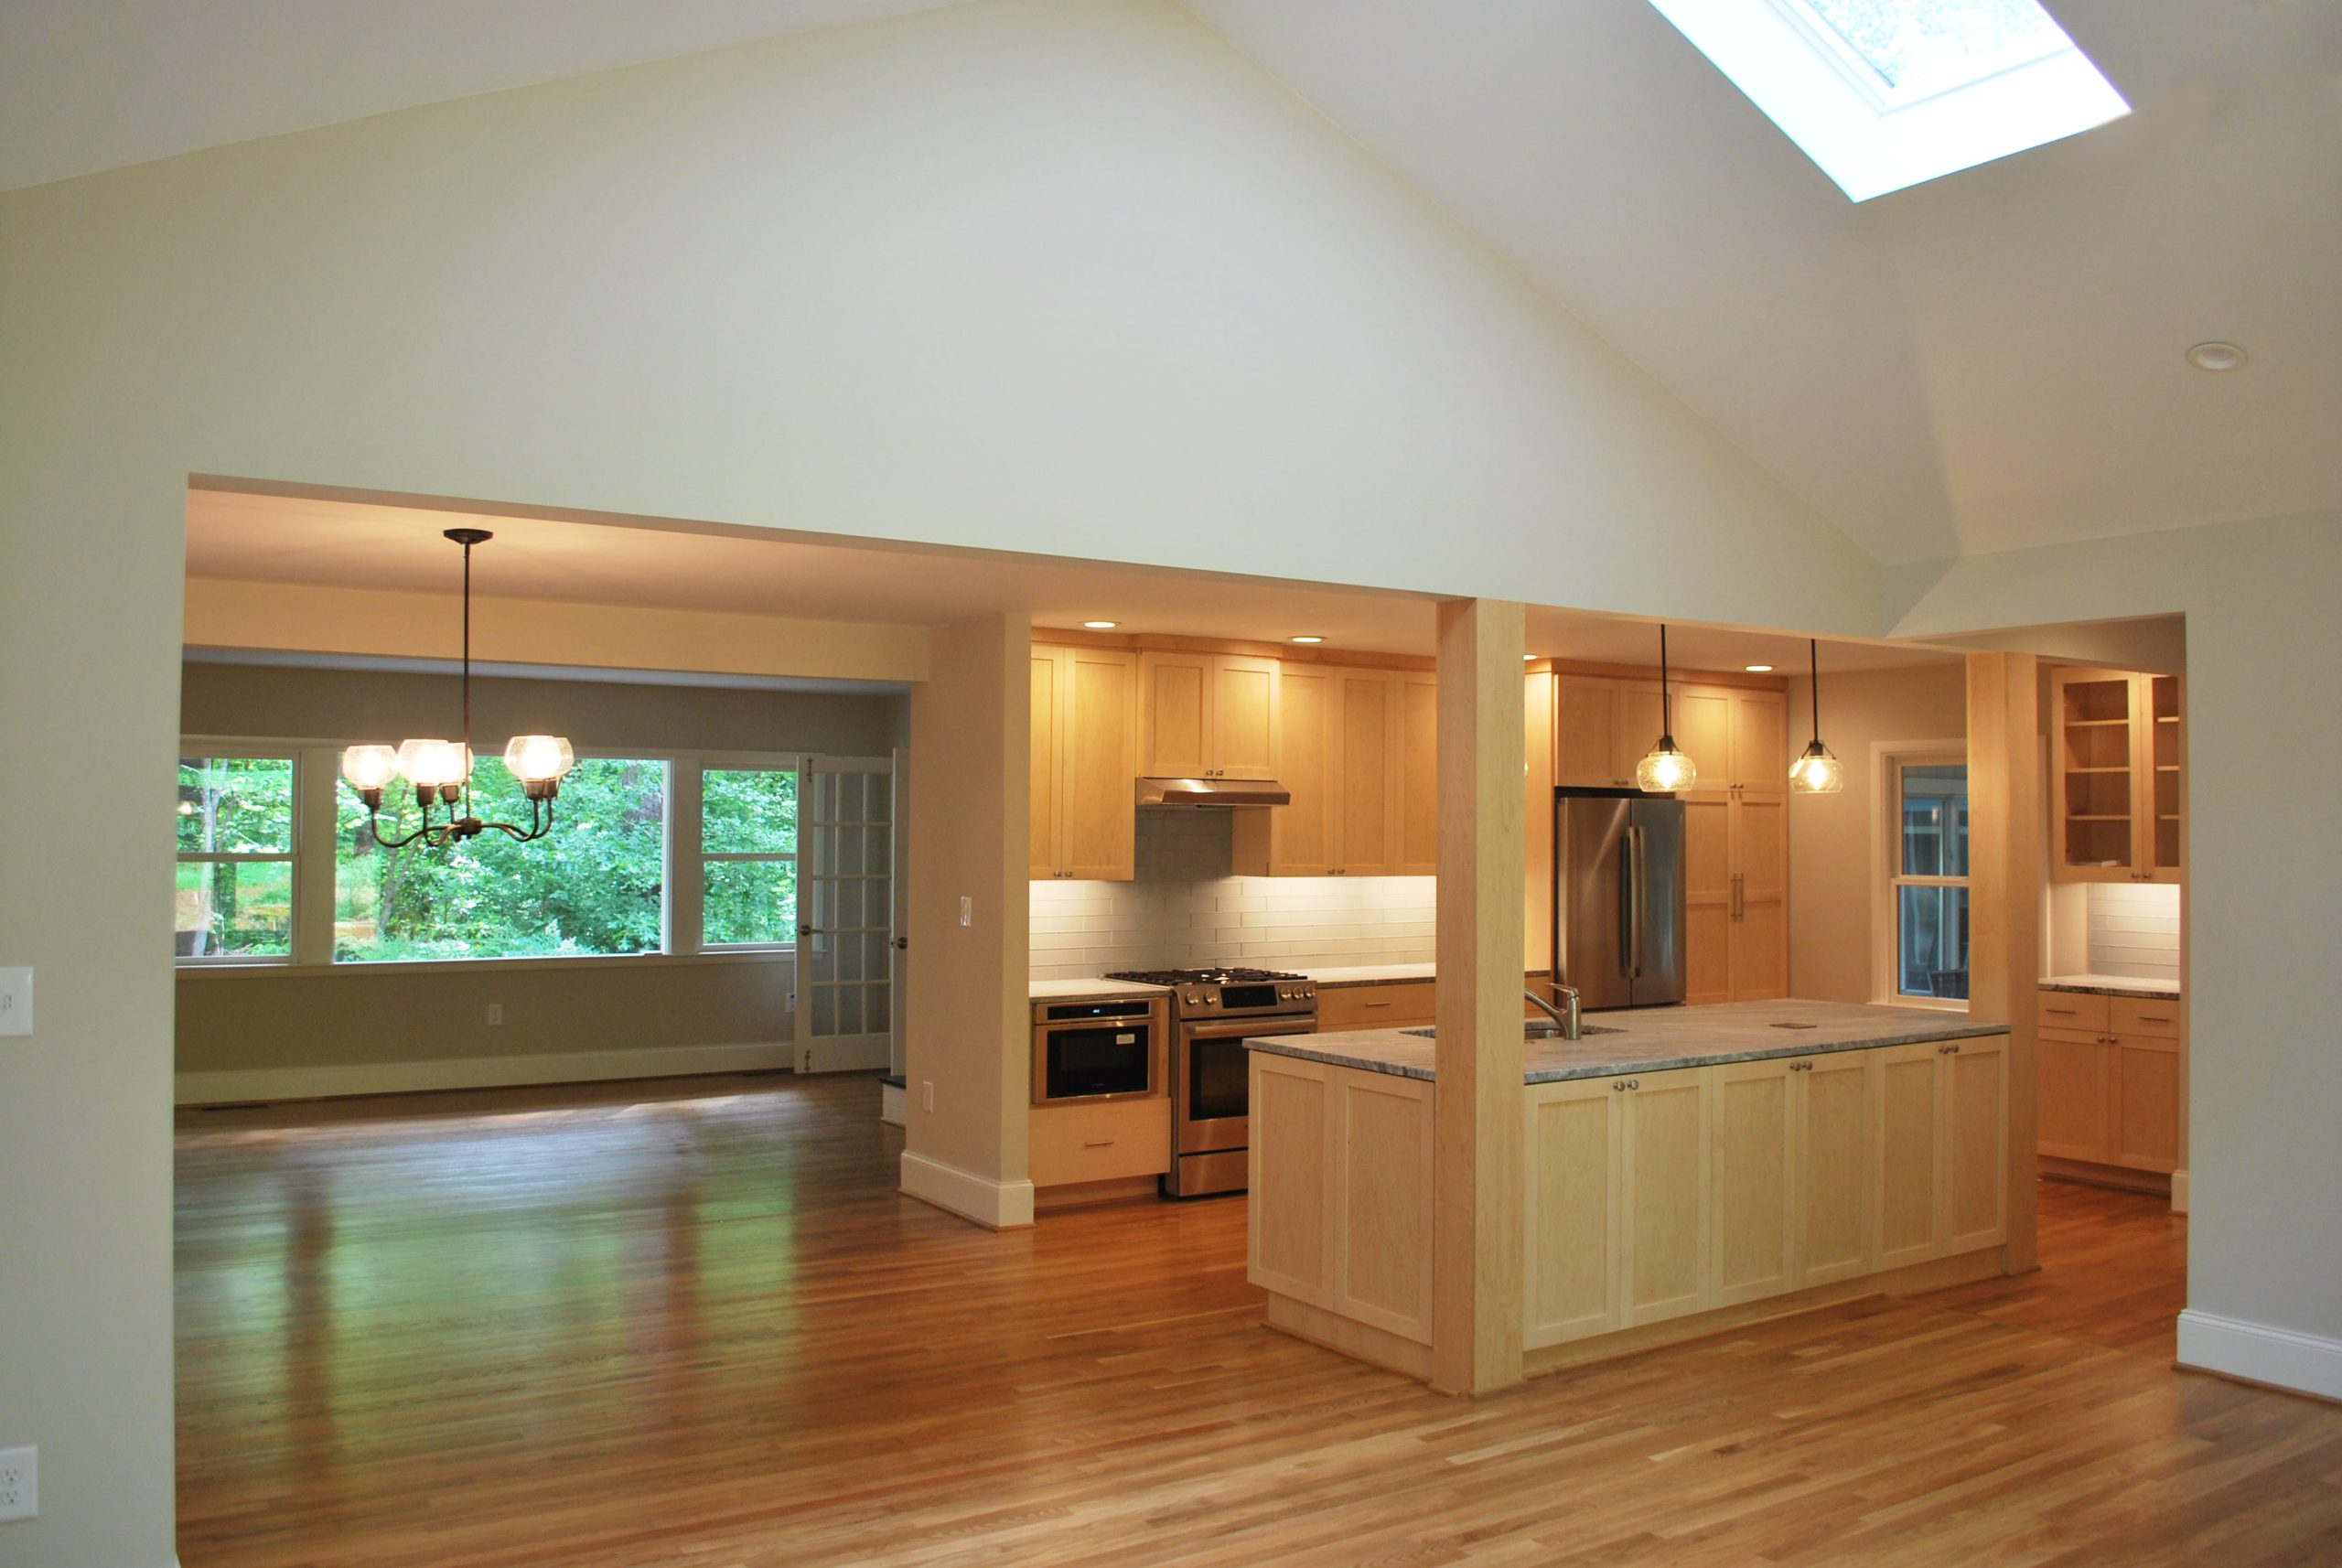 The living space is open to the updated kitchen, where warm wood cabinets compliment the original hardwood floors